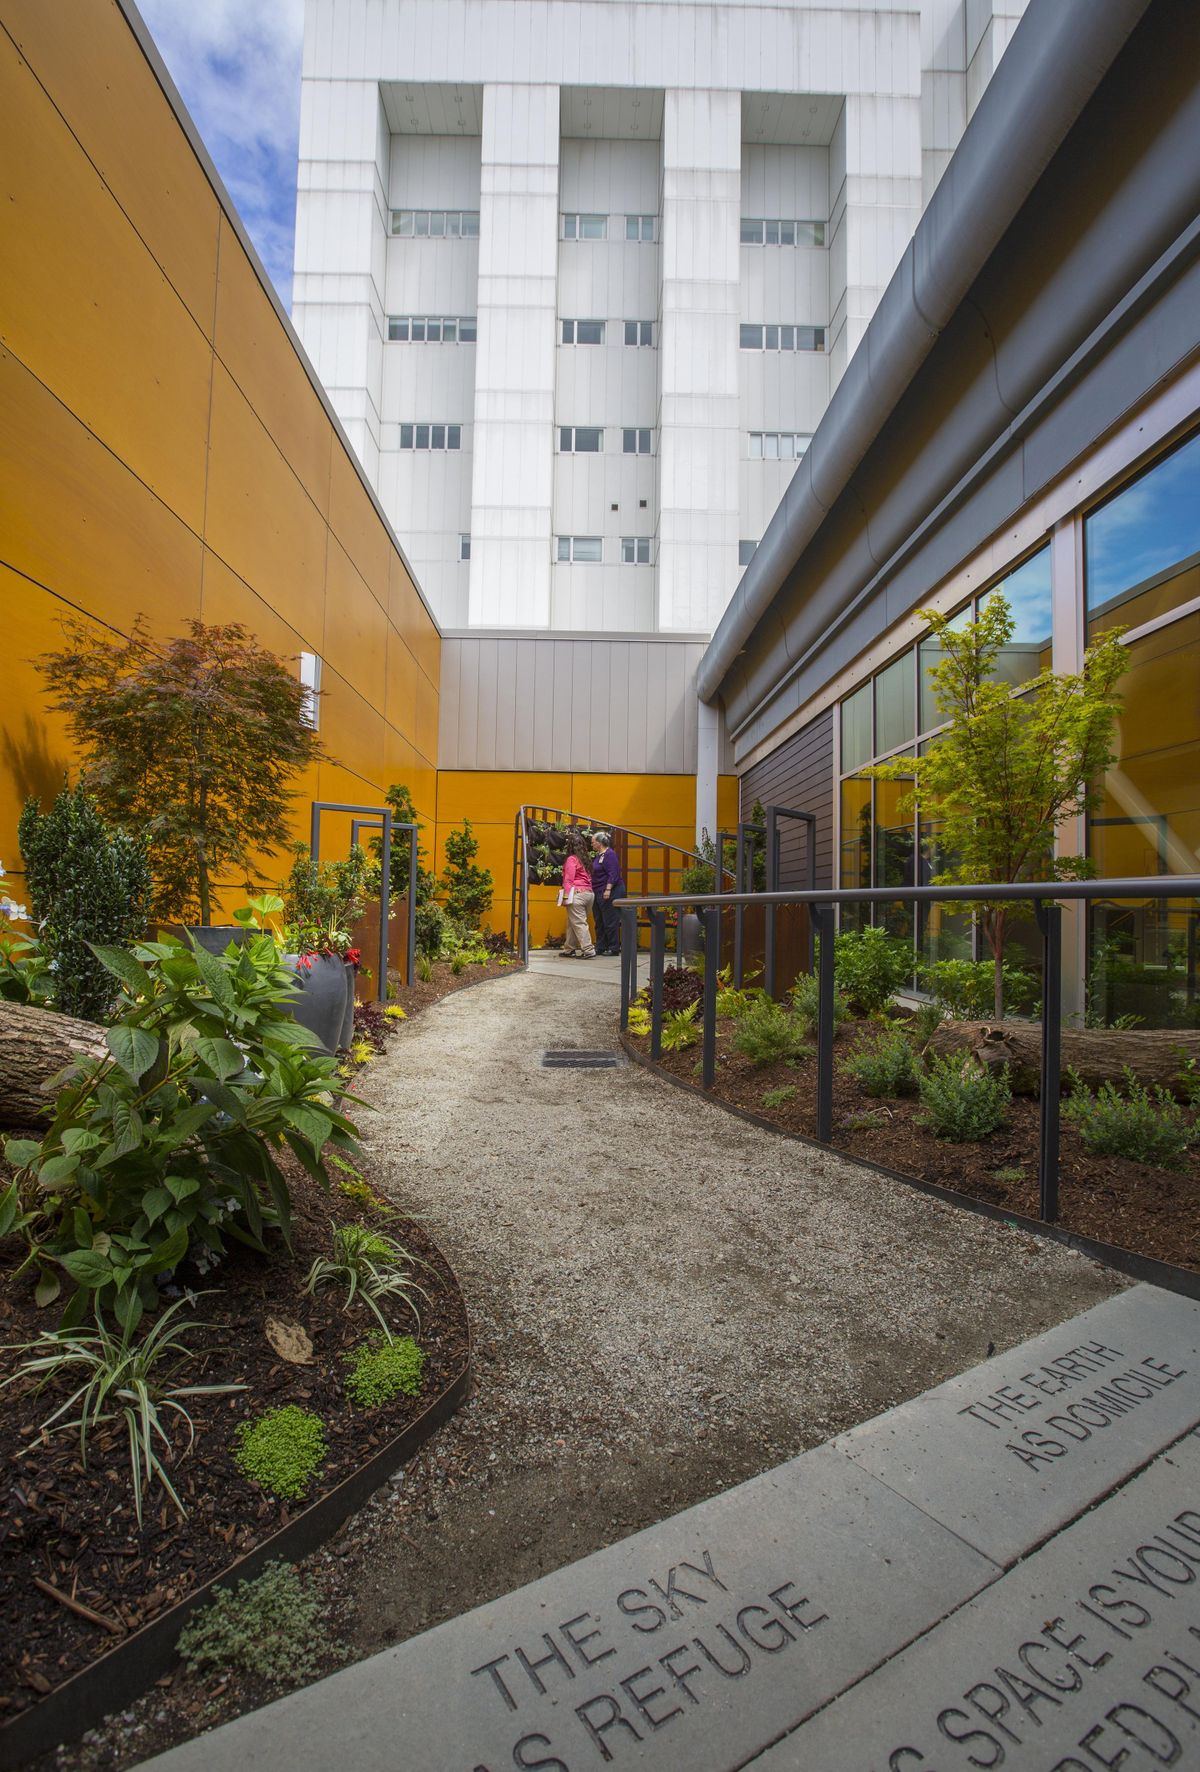 At the VA medical center on Beacon Hill in Seattle, a new healing garden softens the institutional edges, providing soothing sounds of water and inviting birds into the space to help patients and their loved ones. (Mike Siegel/Seattle Times/TNS) (Mike Siegel / Tribune News Service photos)